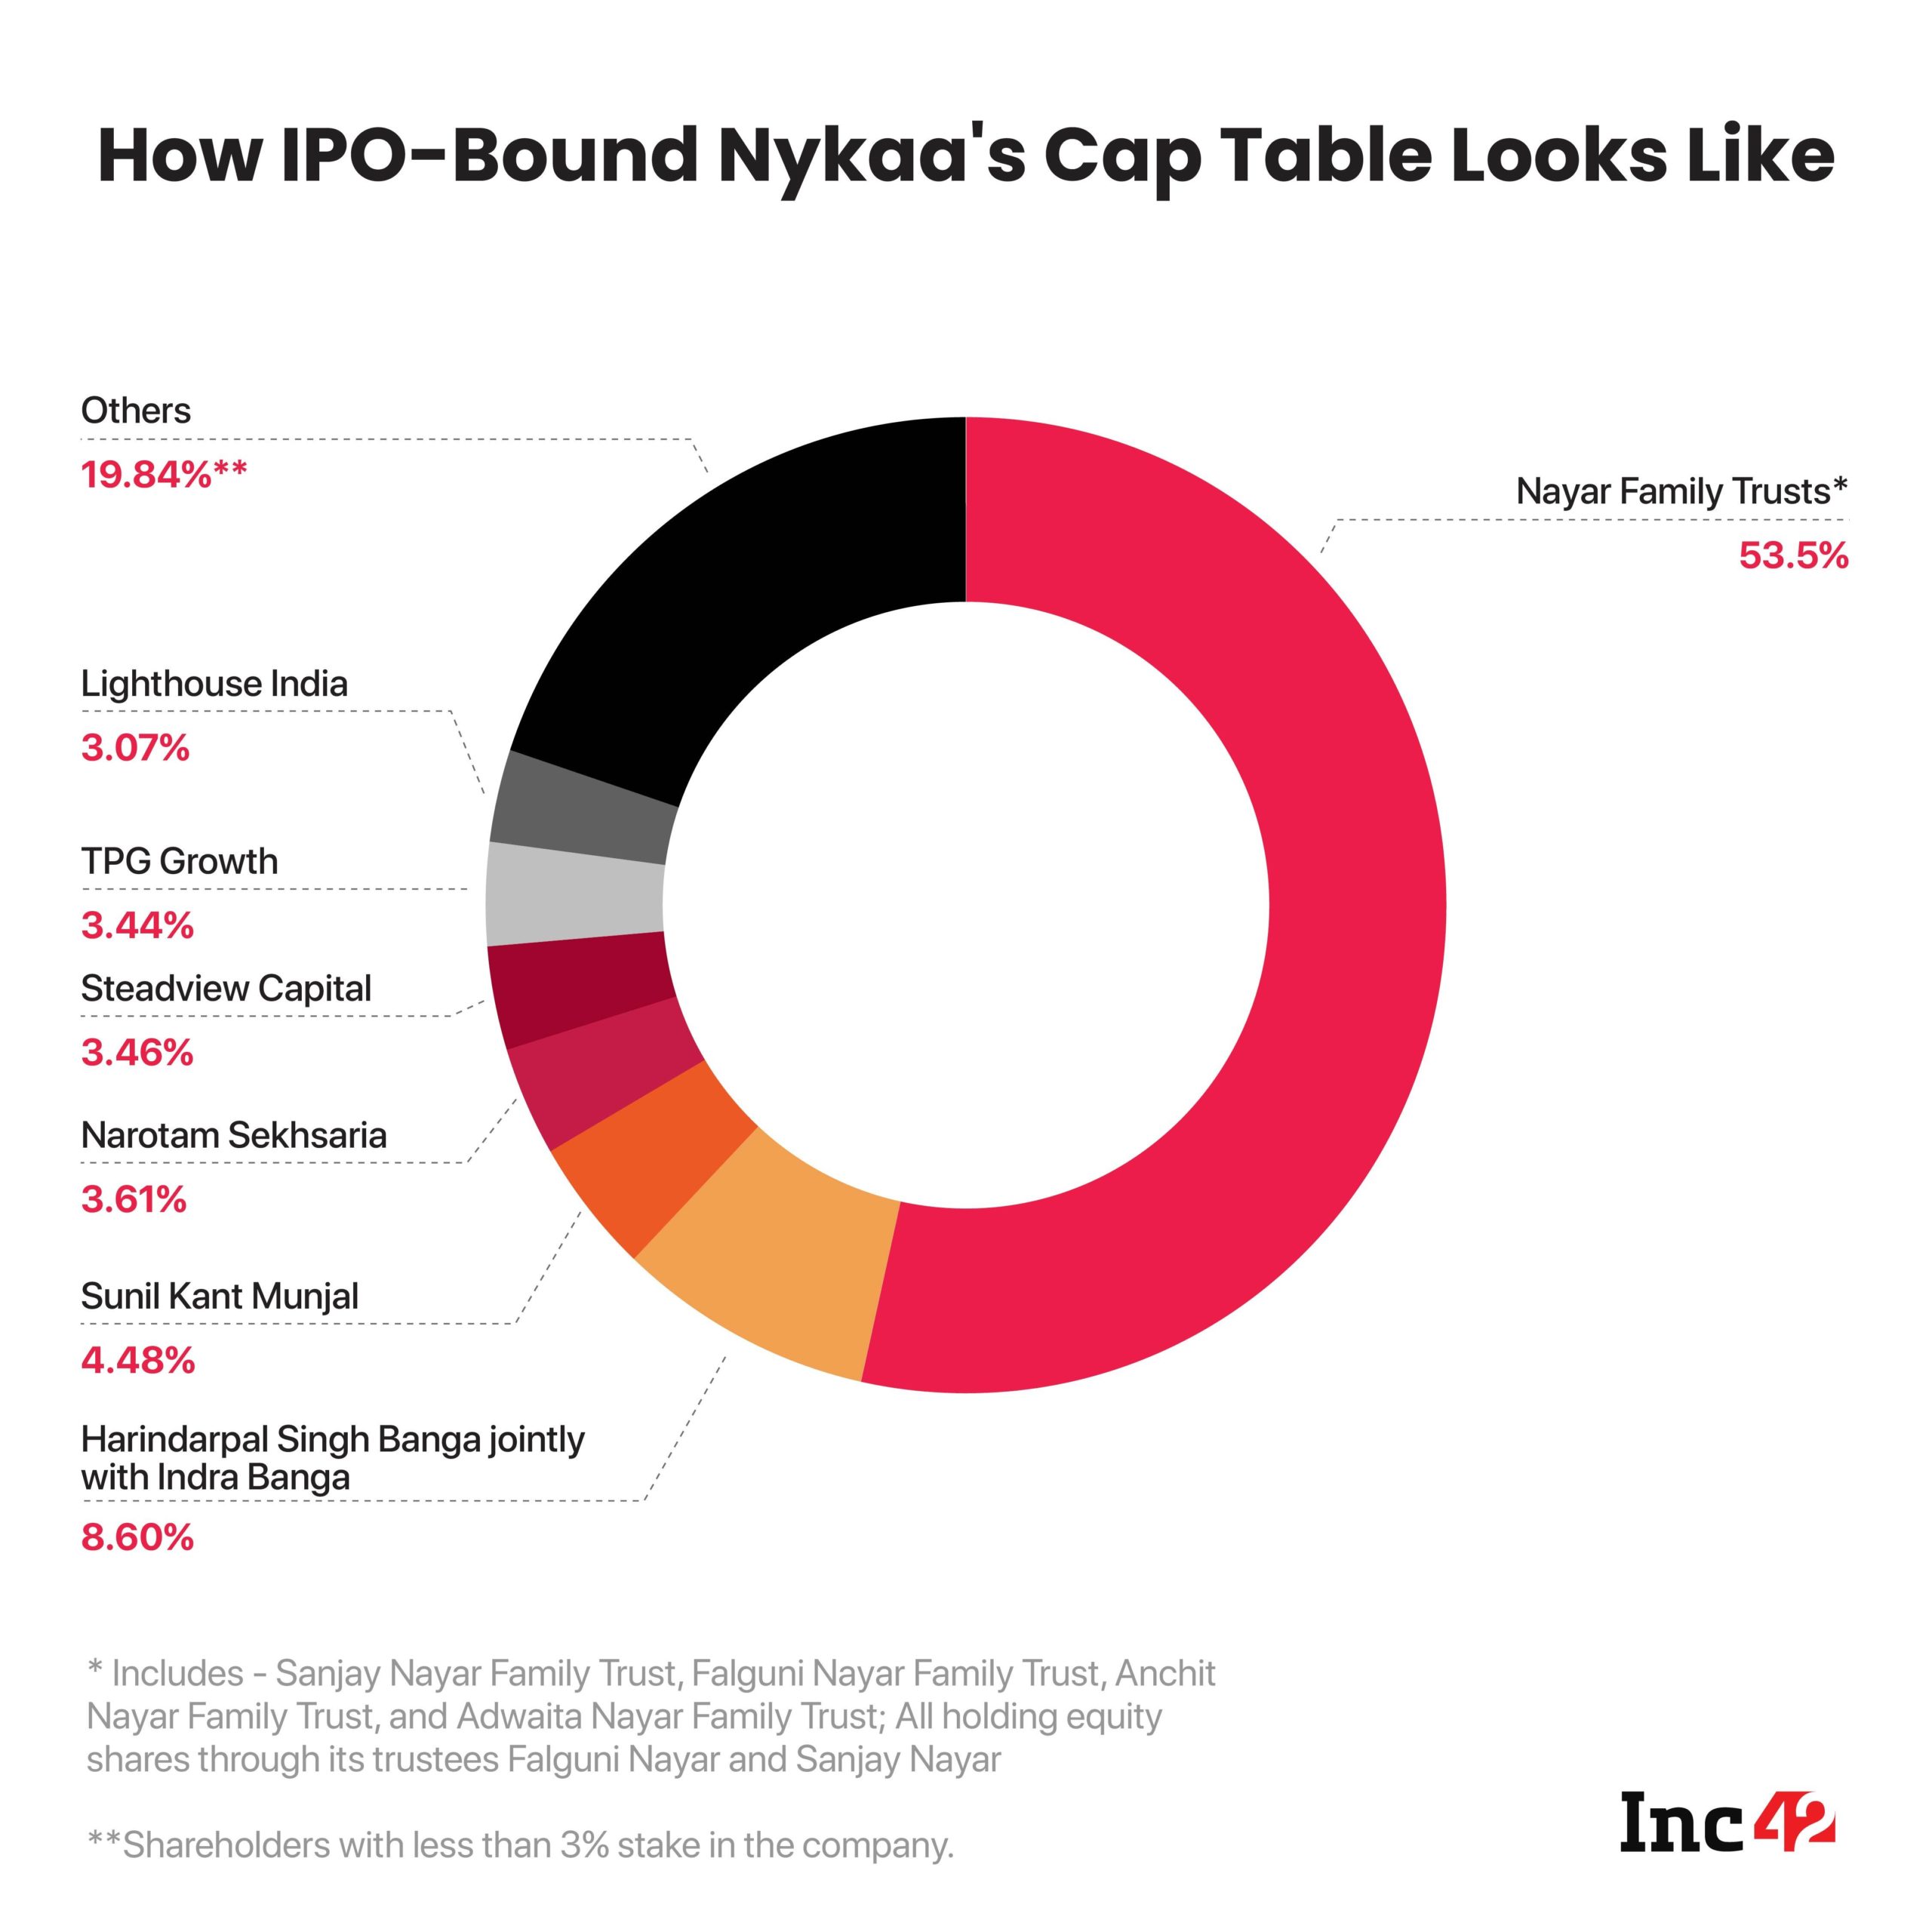 A Look Inside IPO-Bound Nykaa Parent’s Shareholding Pattern